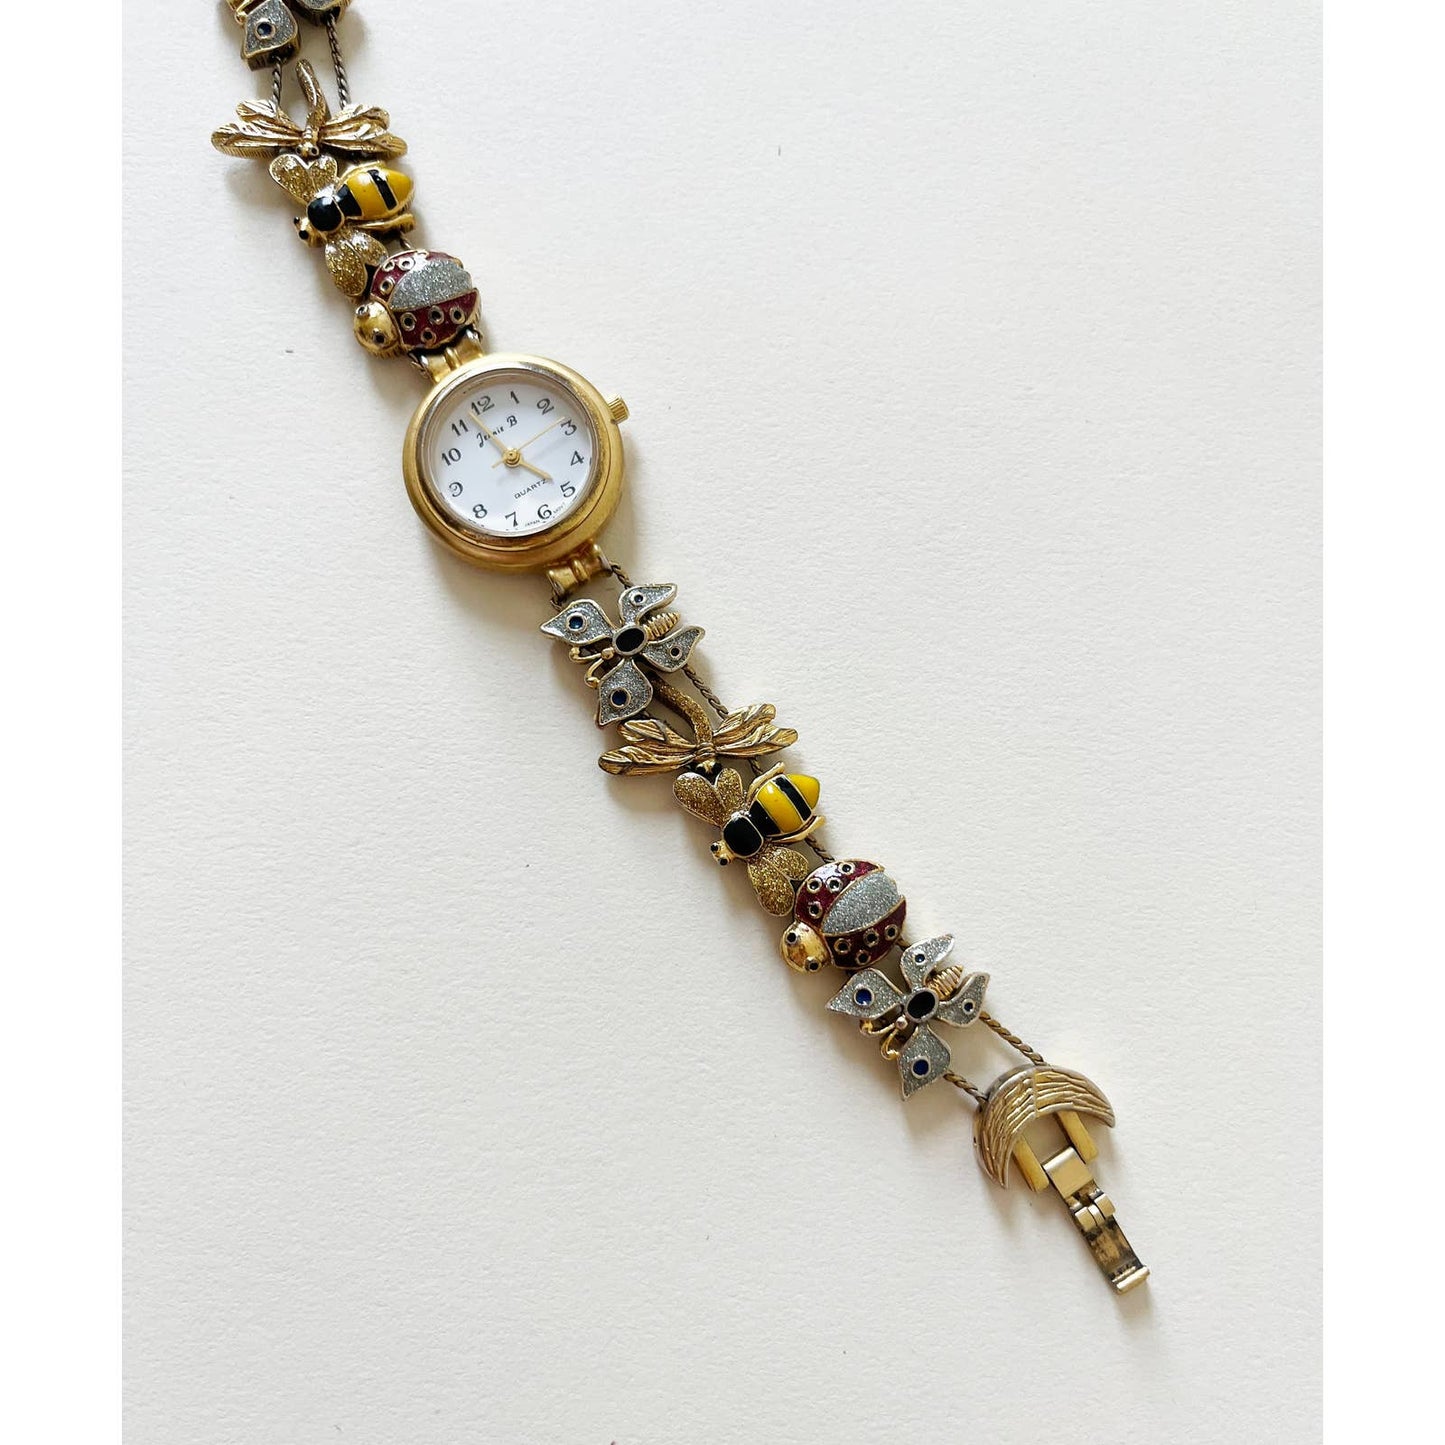 Vintage Rare Whimsical Insect Bracelet Watch